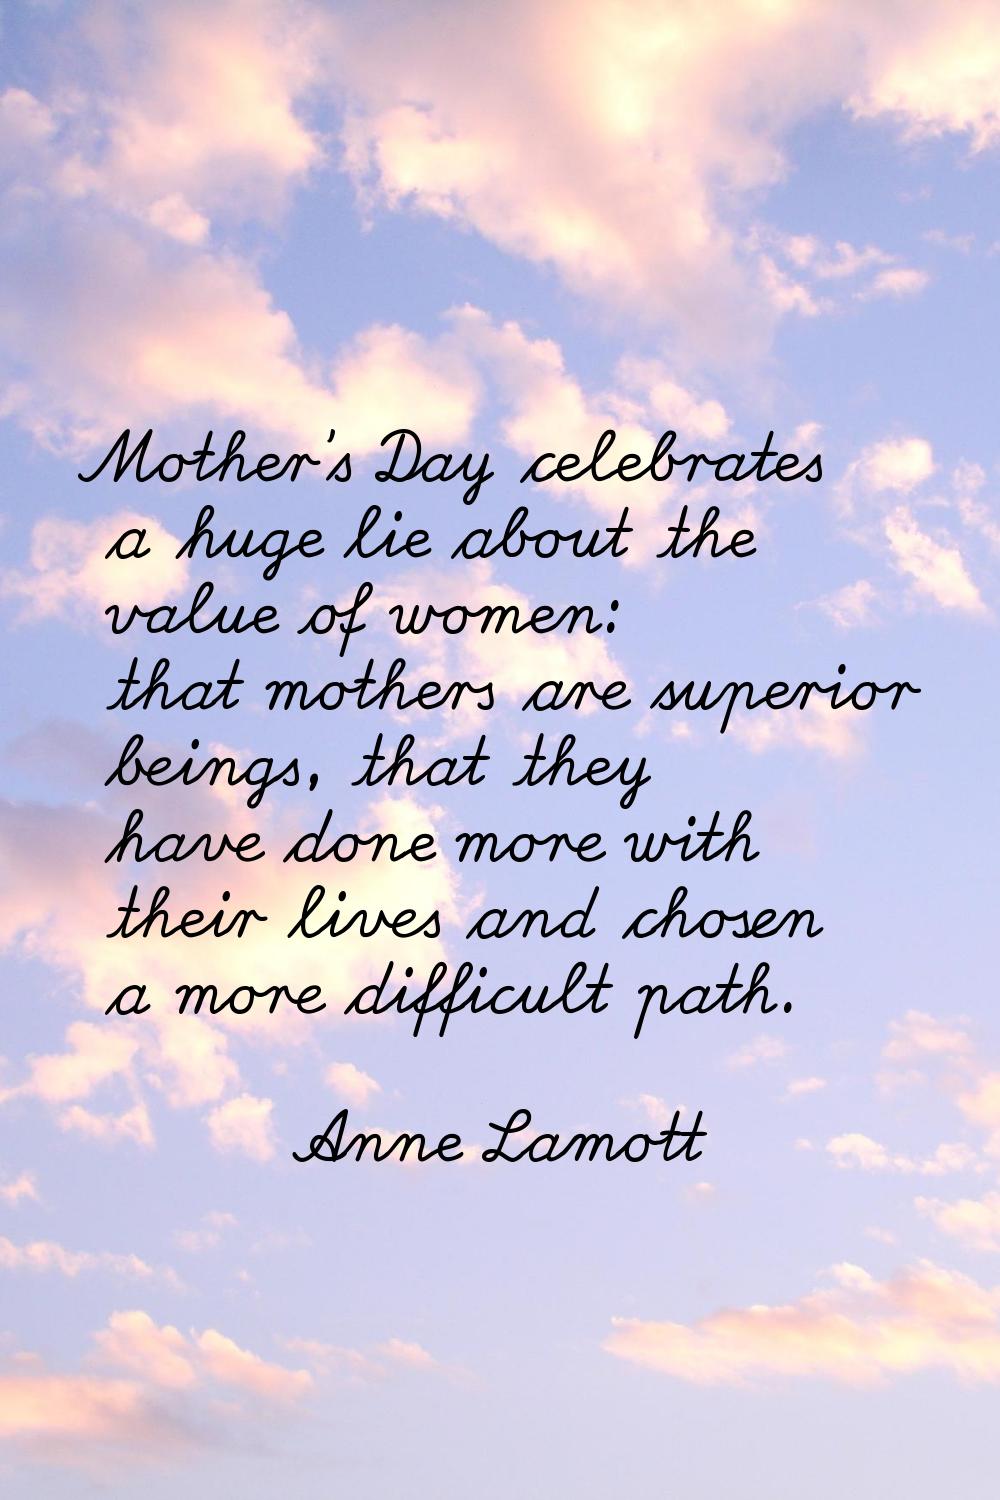 Mother's Day celebrates a huge lie about the value of women: that mothers are superior beings, that